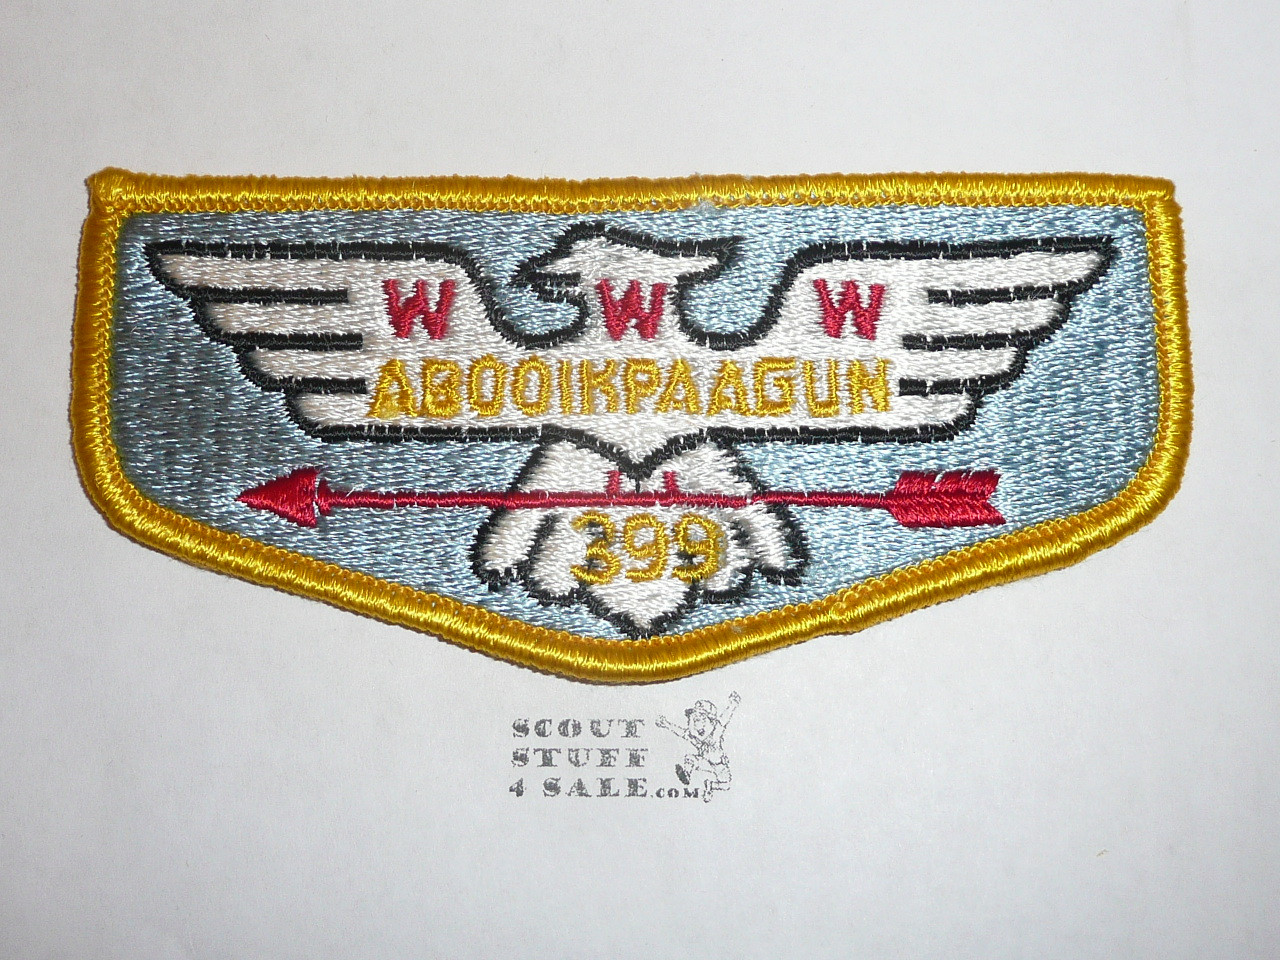 Order of the Arrow Lodge #399 Abooikpaagun s2a Flap Patch - Boy Scout